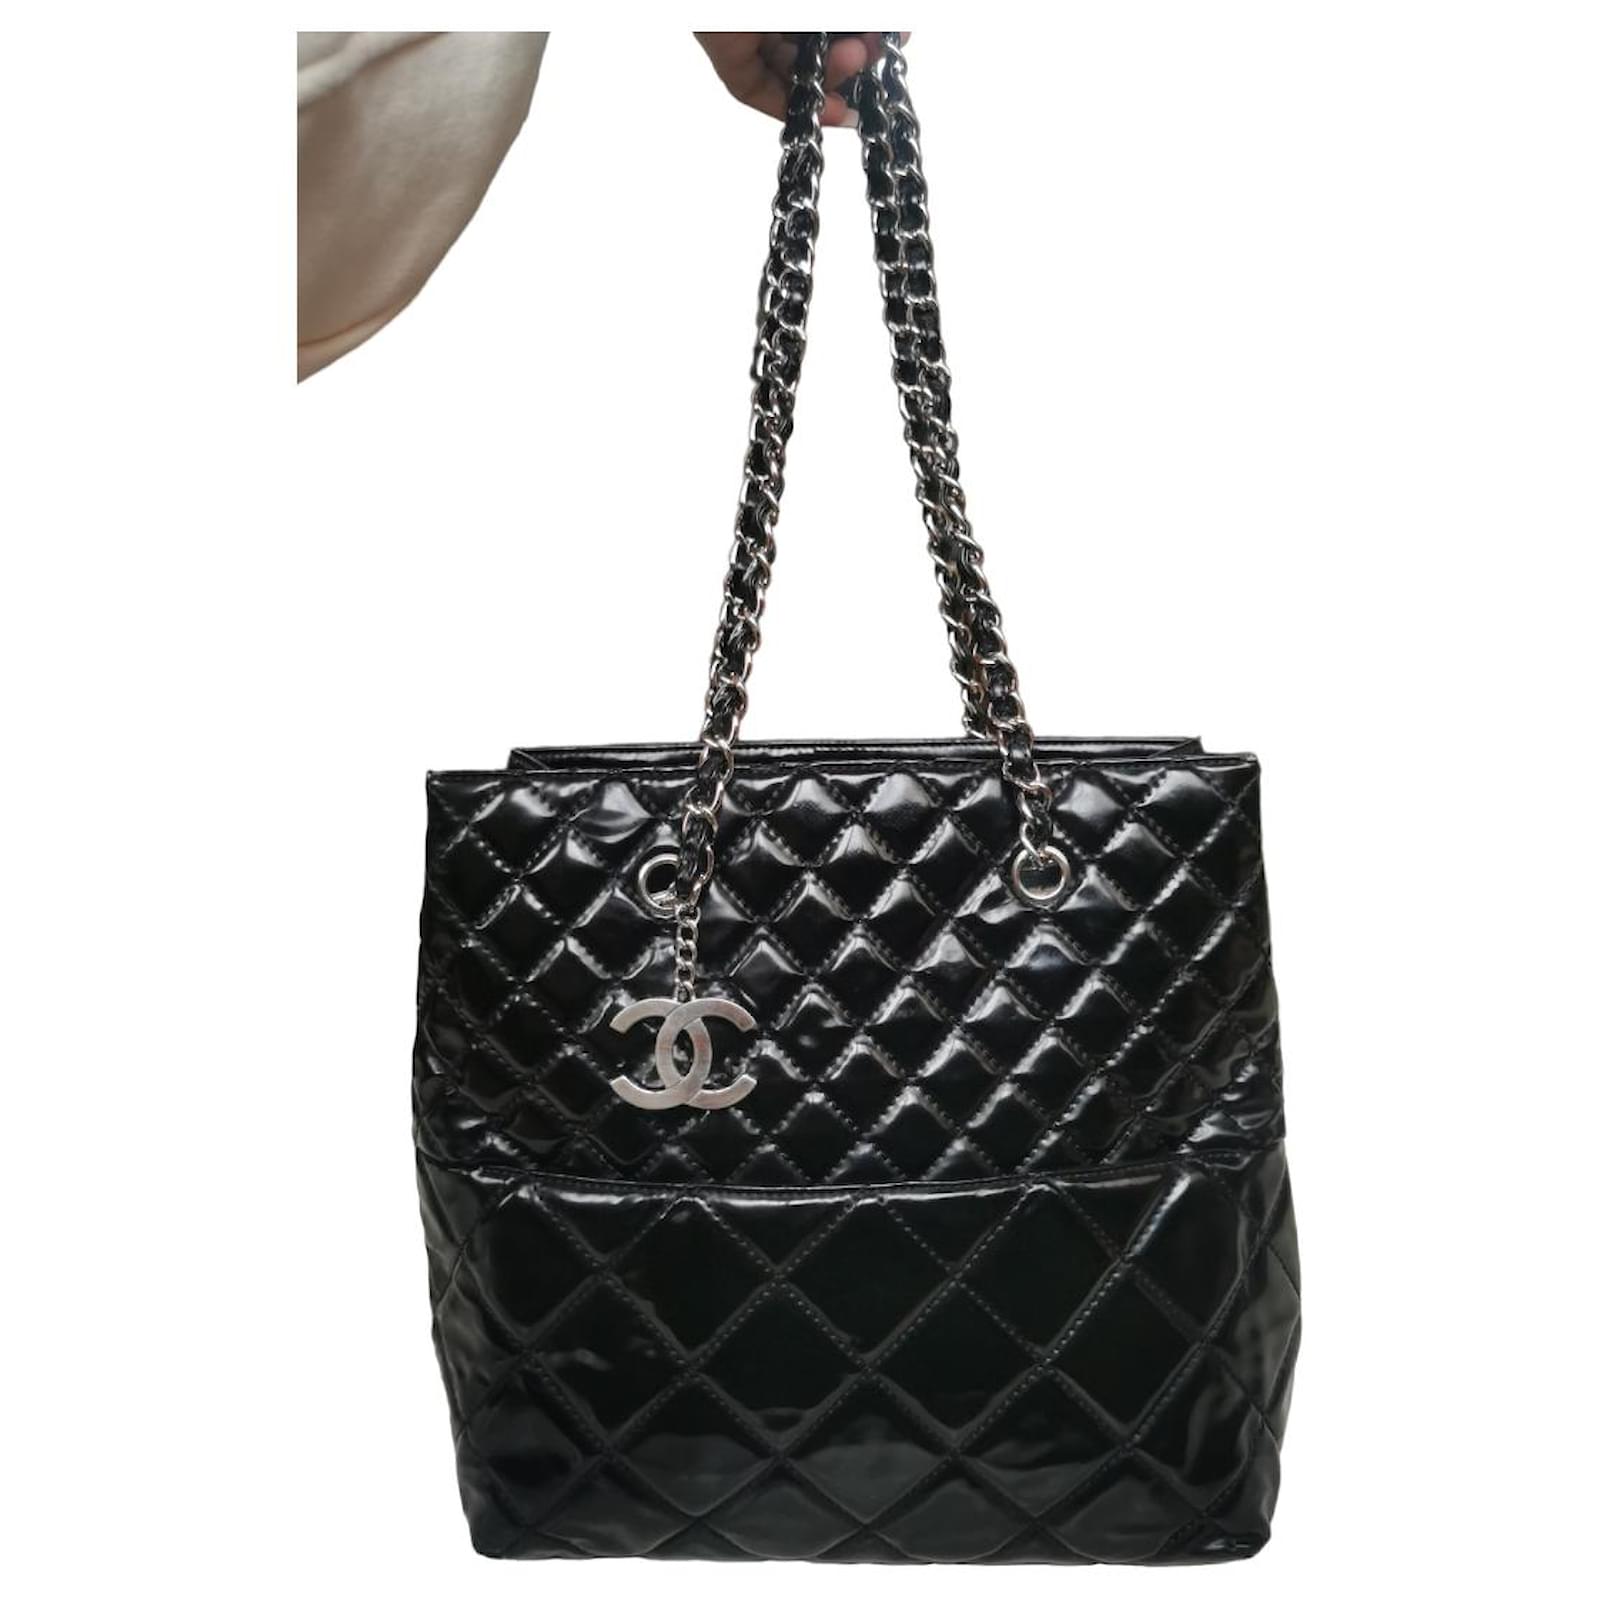 Black patent leather tote bag  Chanel: Handbags and Accessories